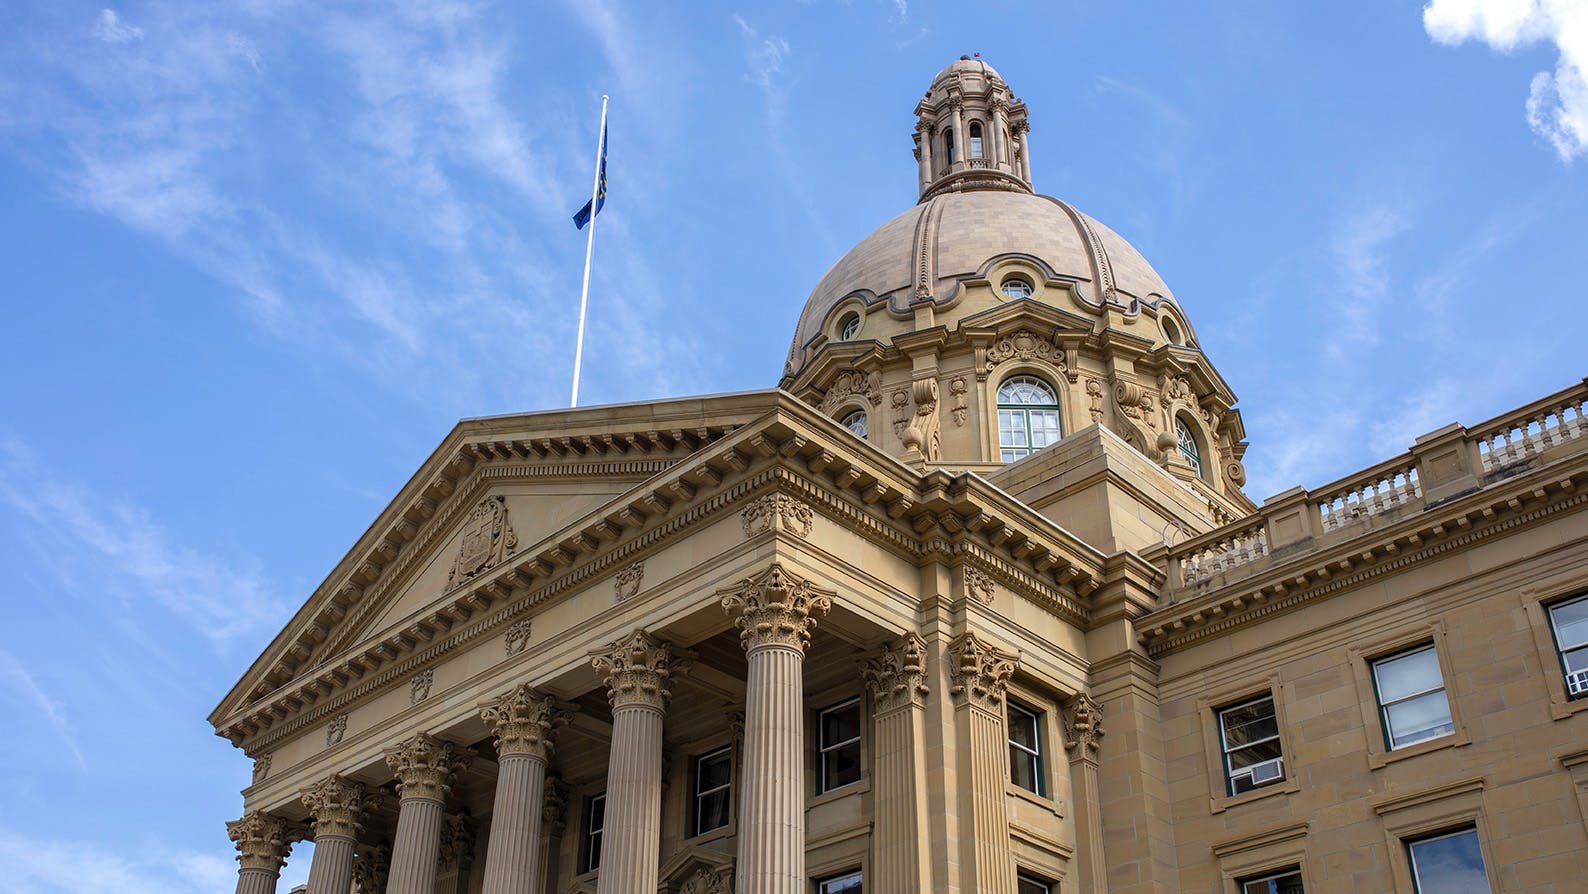 Alberta Legislature Building in front of blue sky from downward angle